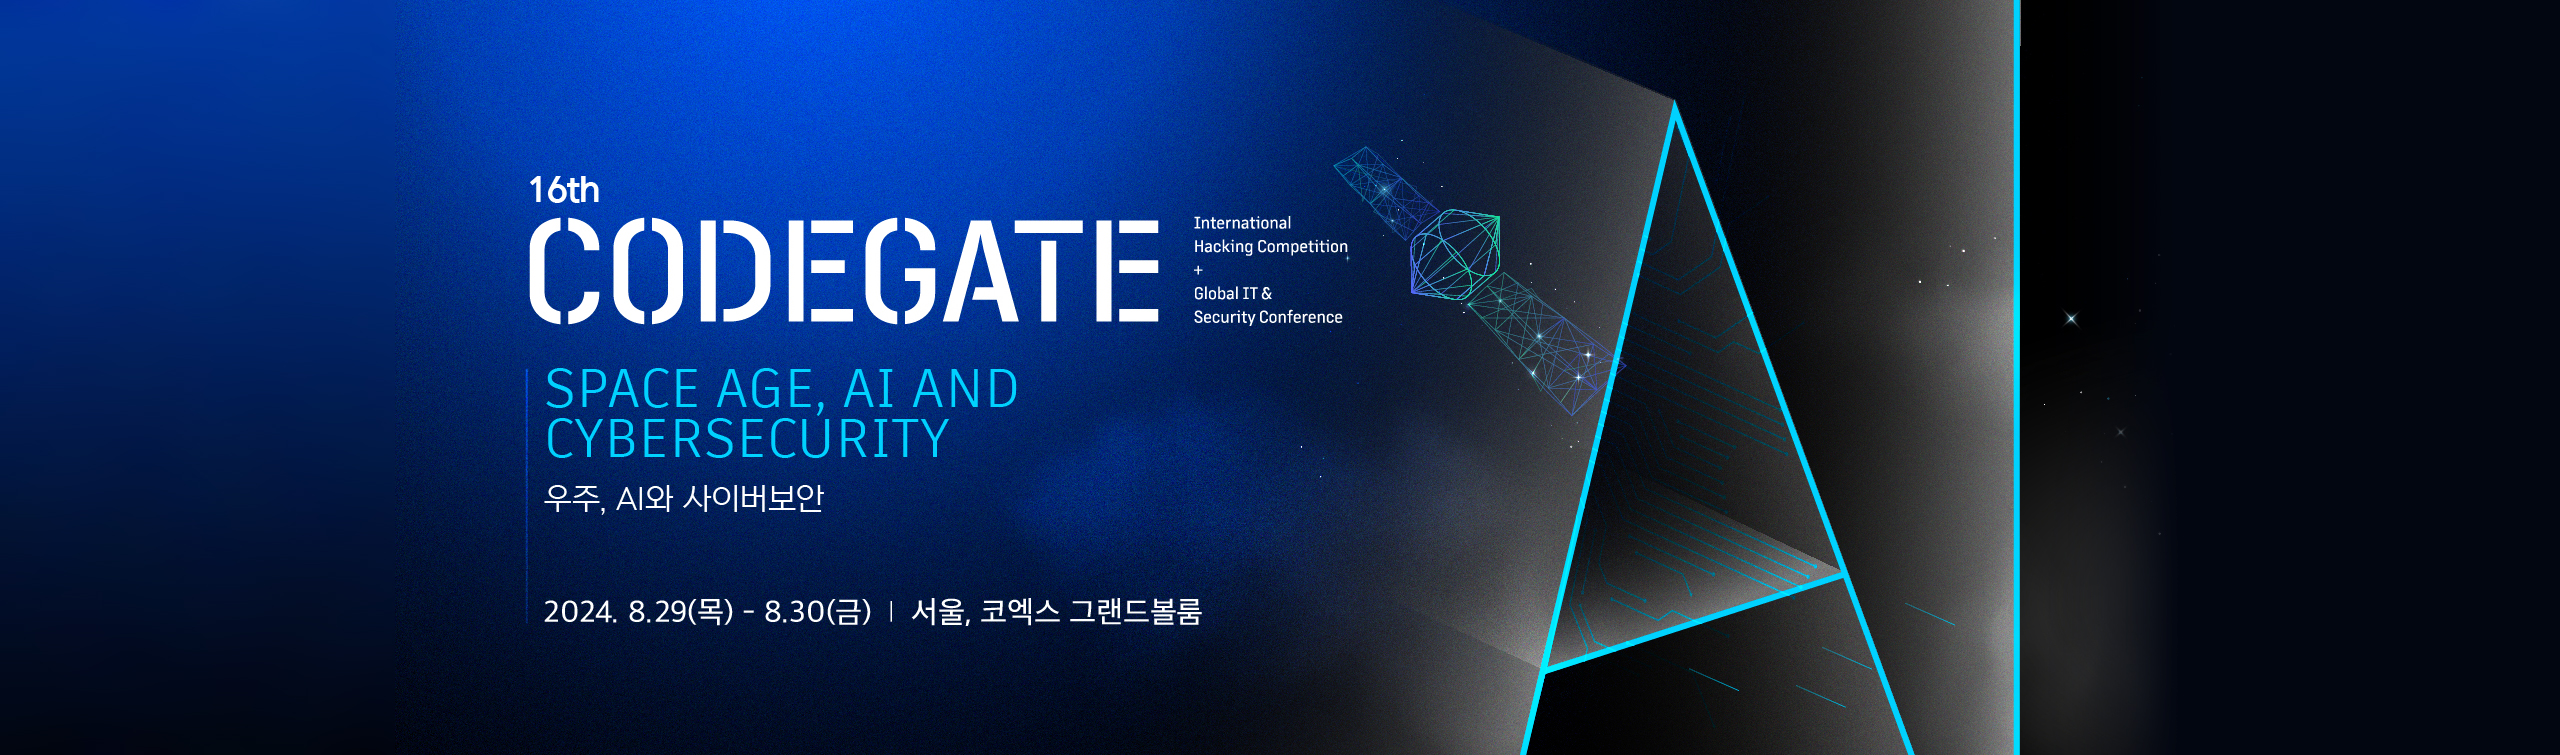 CODEGATE International Hacking Competition